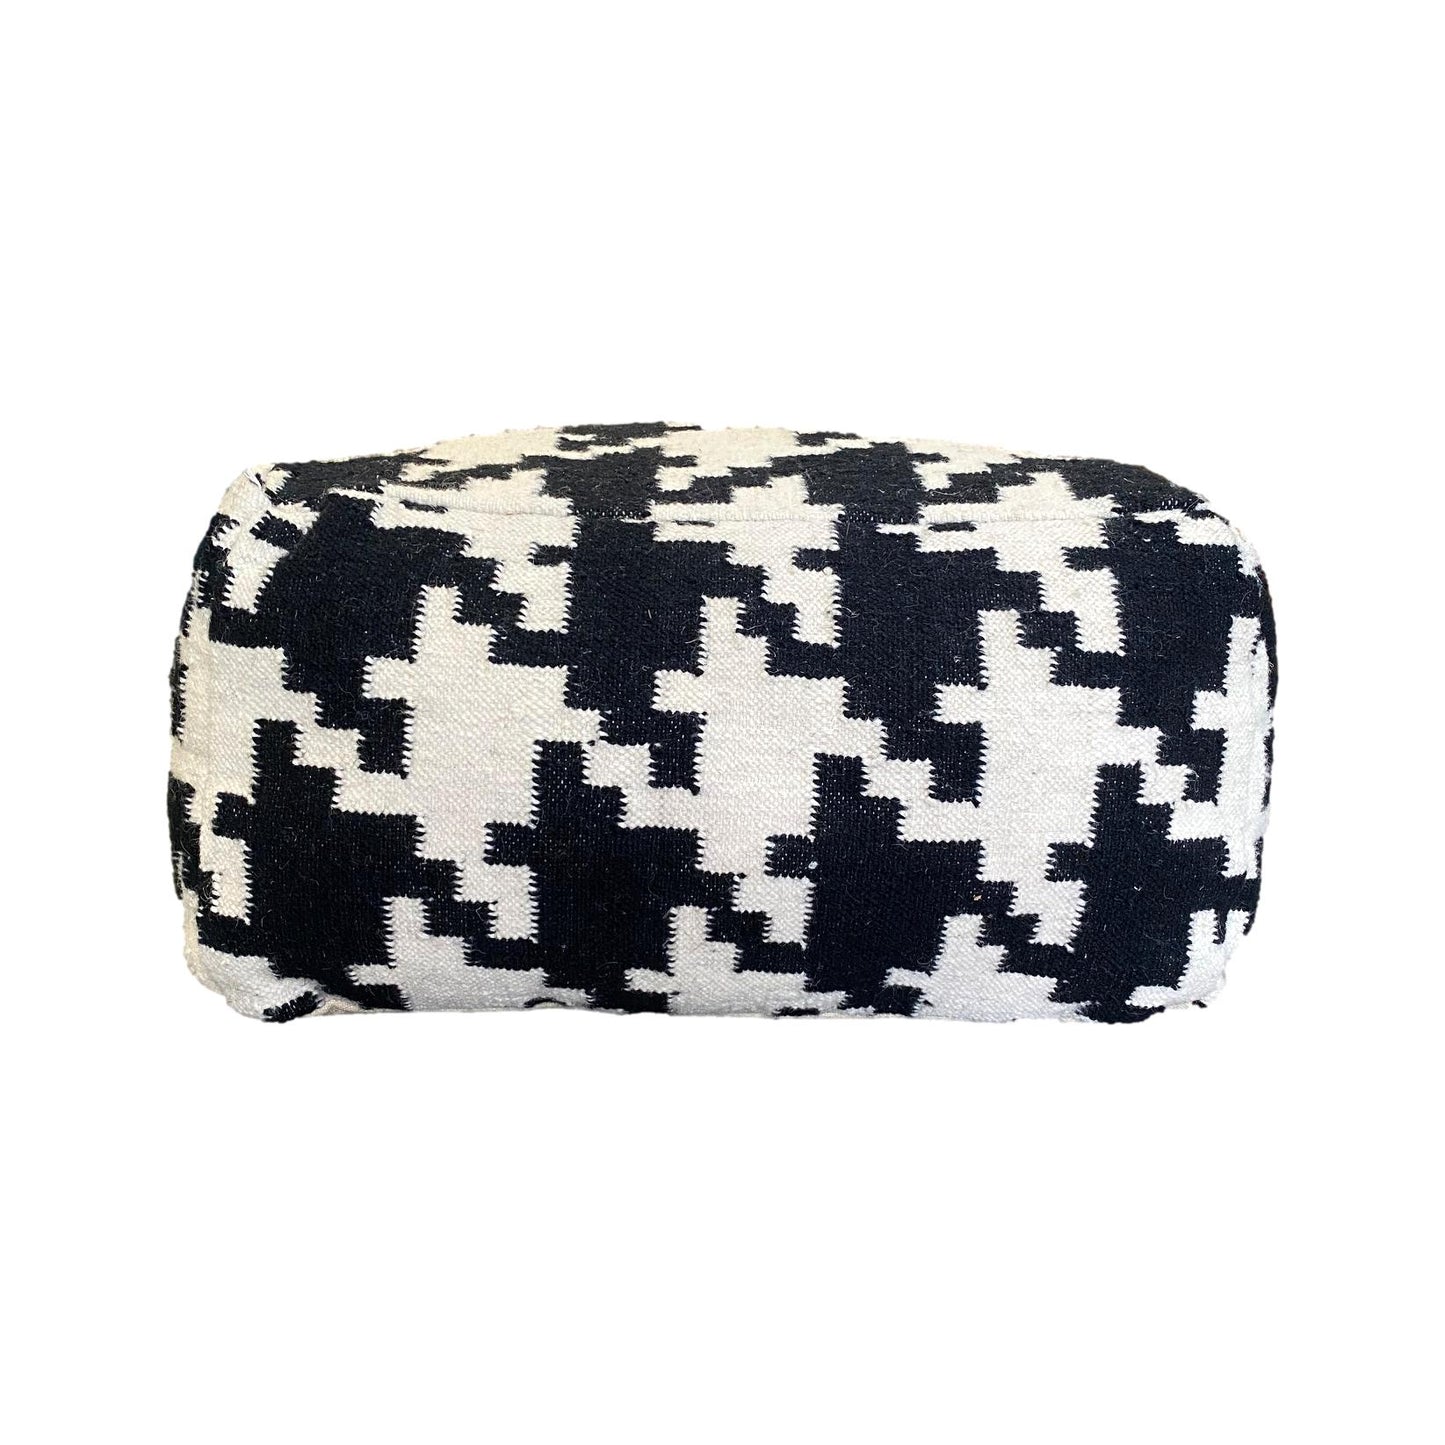 Houndstooth Pouf